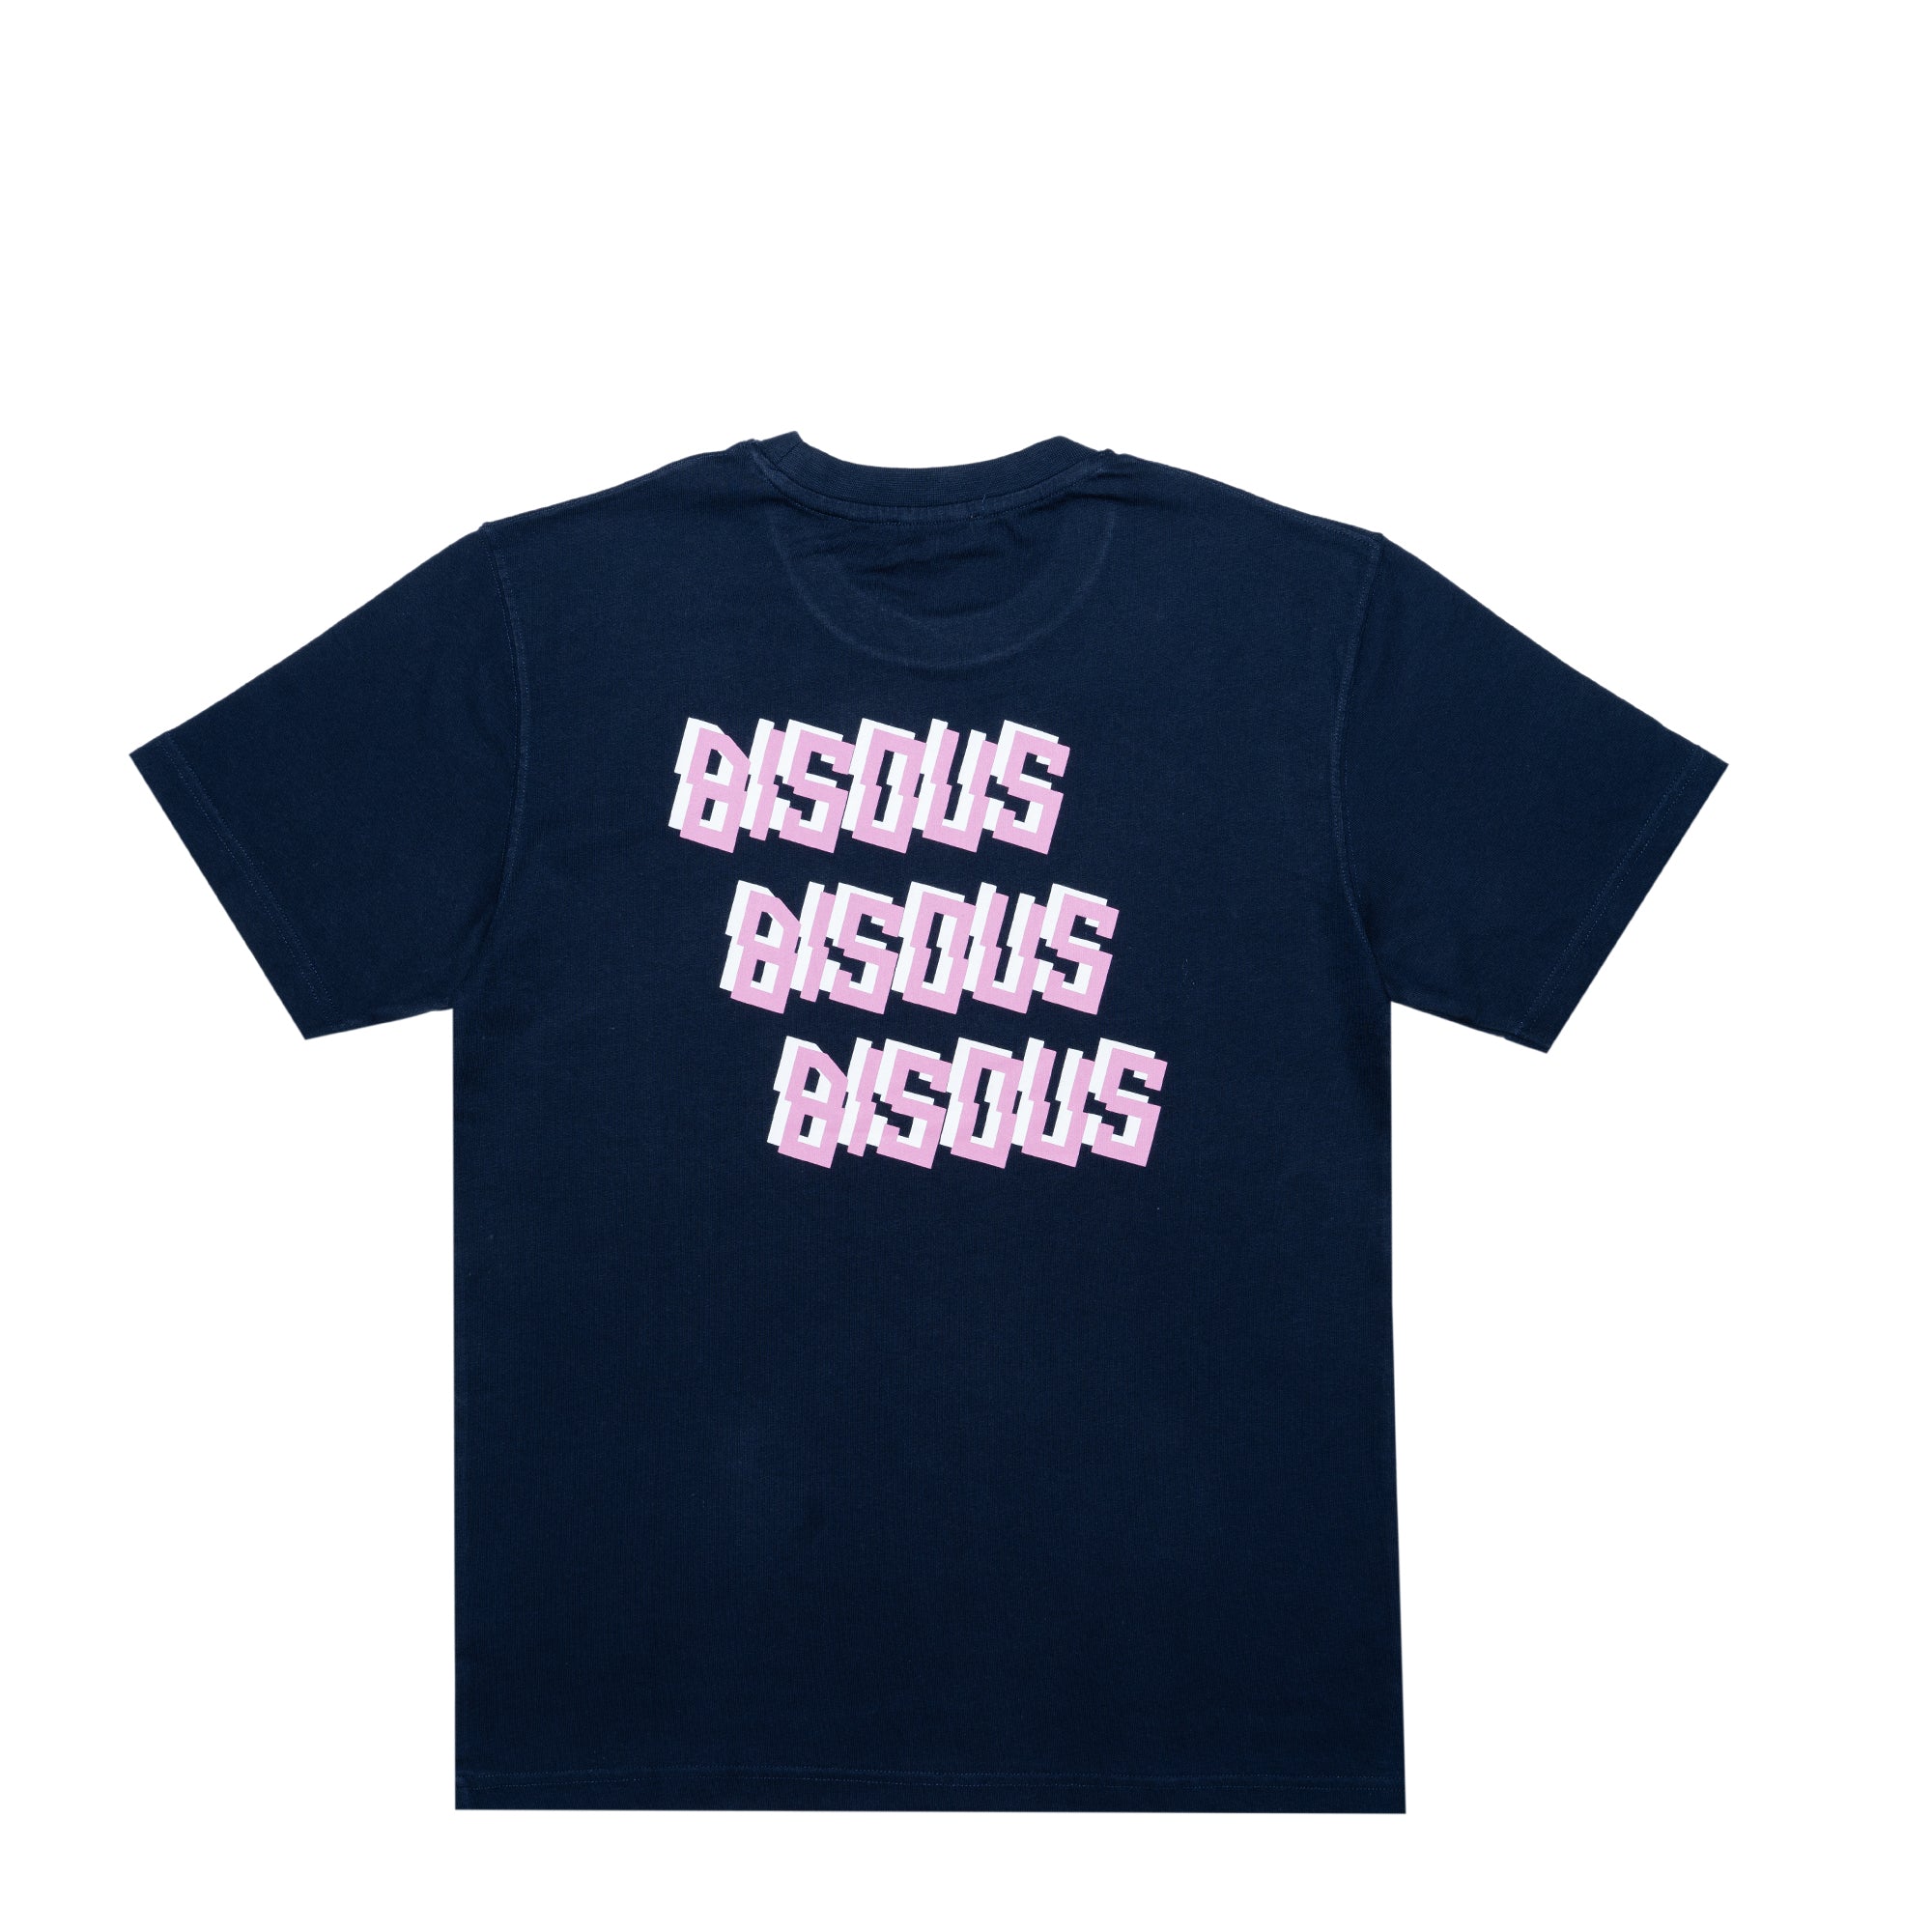 T-shirts Bisous x3 Back Navy